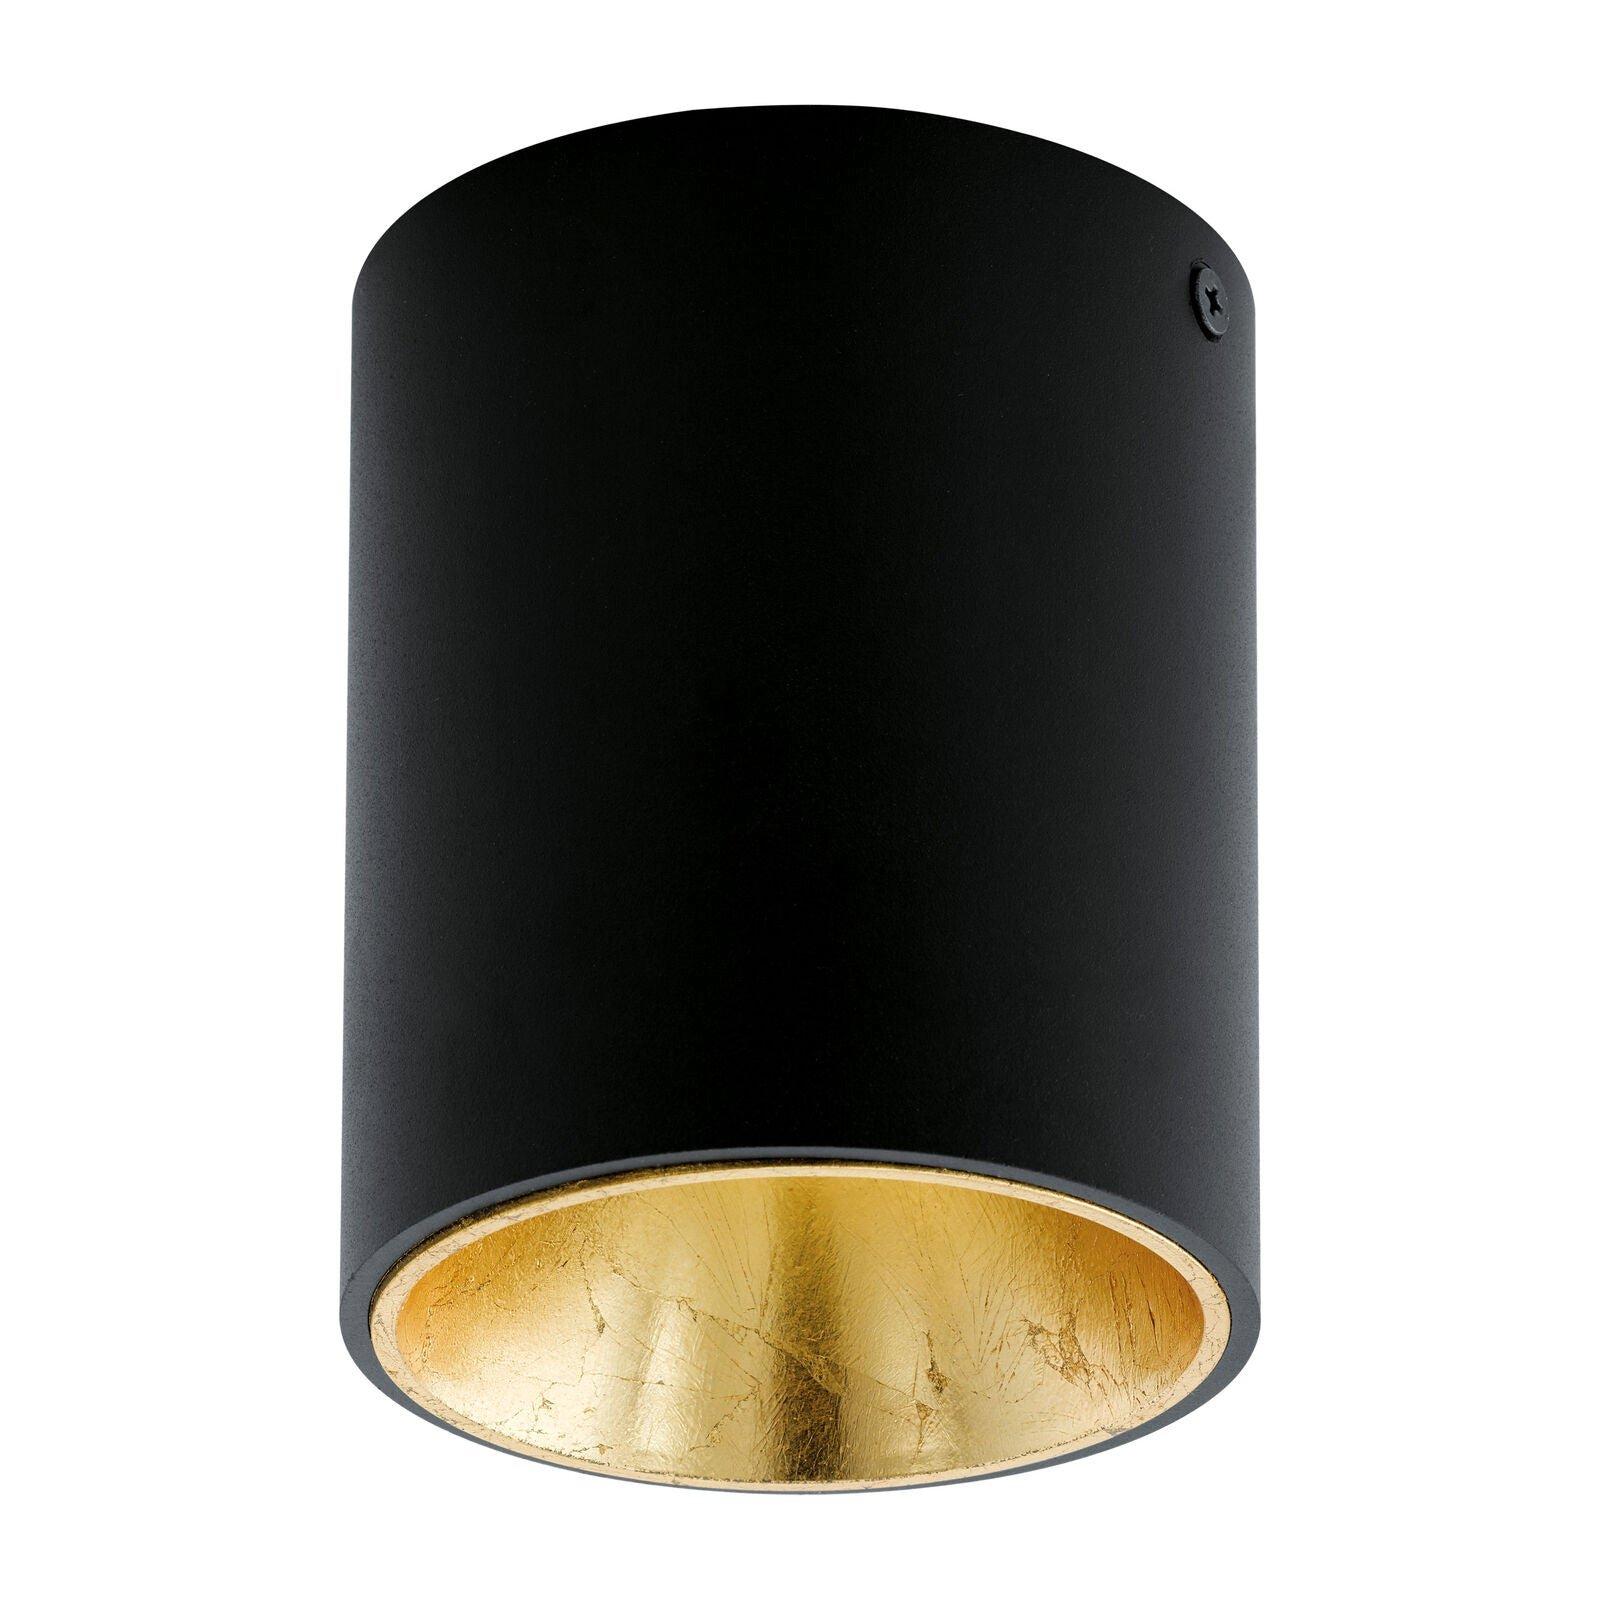 Wall / Ceiling Light Black & Gold Round Downlight 3.3W Built in LED